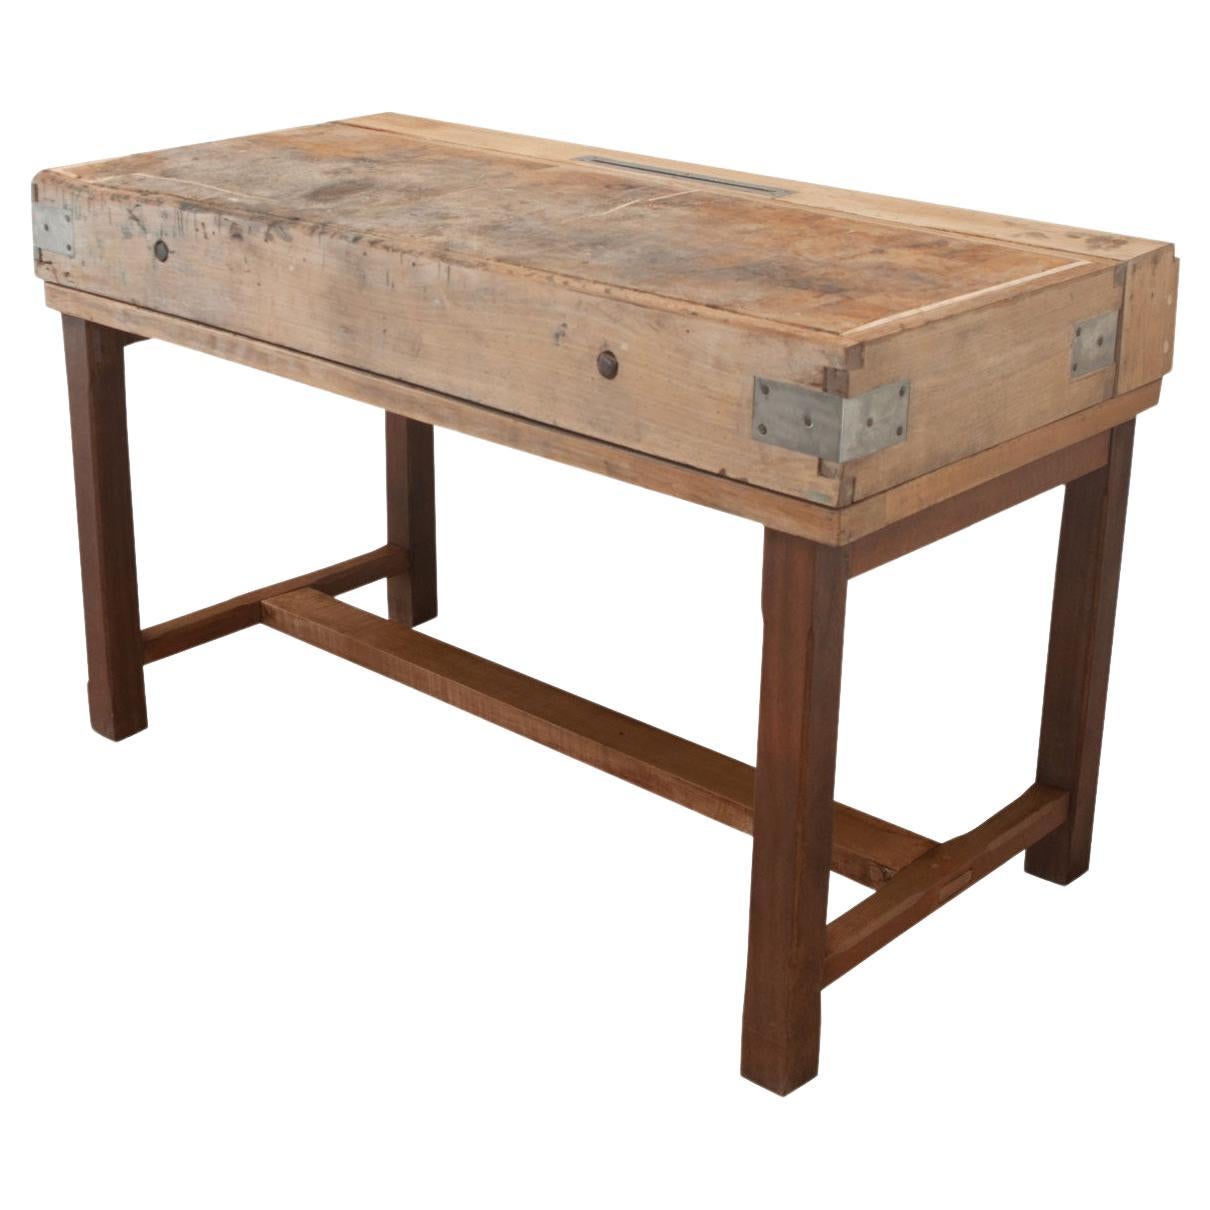 What is a butcher block kitchen island?